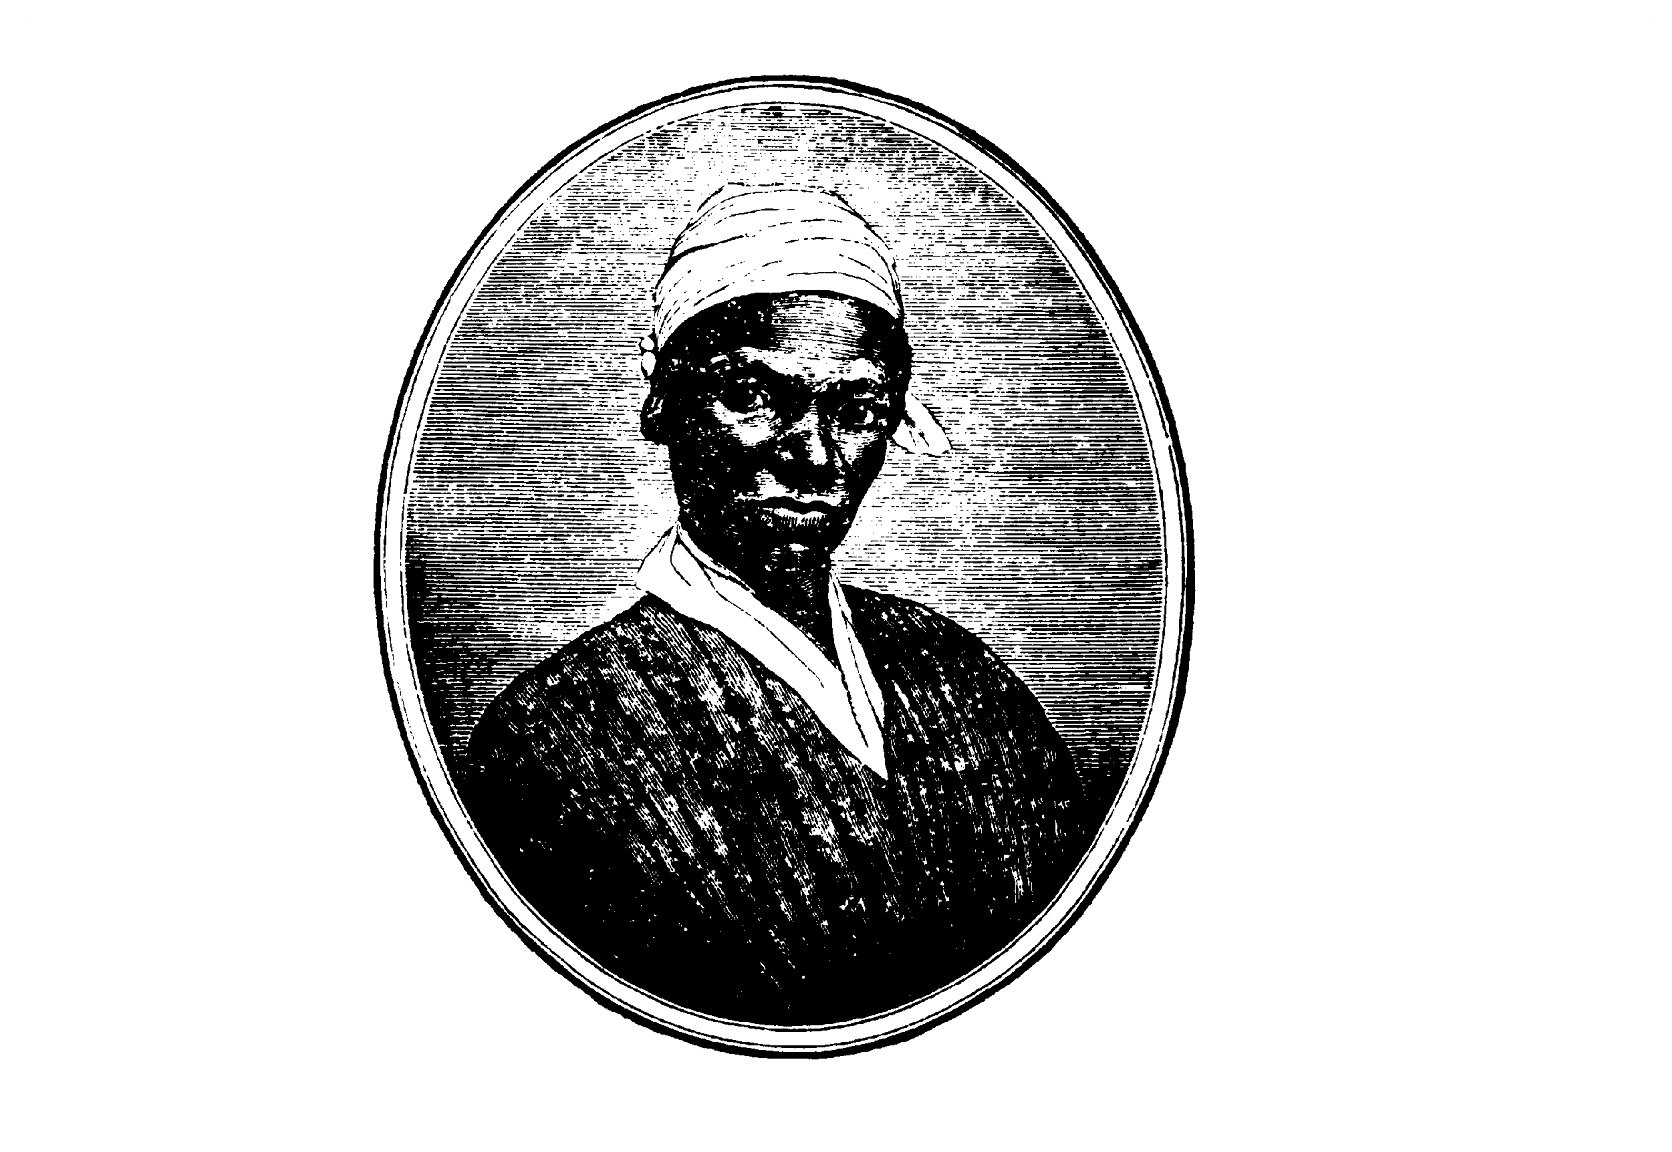 Woodcut print of Sojourner, wearing a white cap, with a white shirt under a coat.